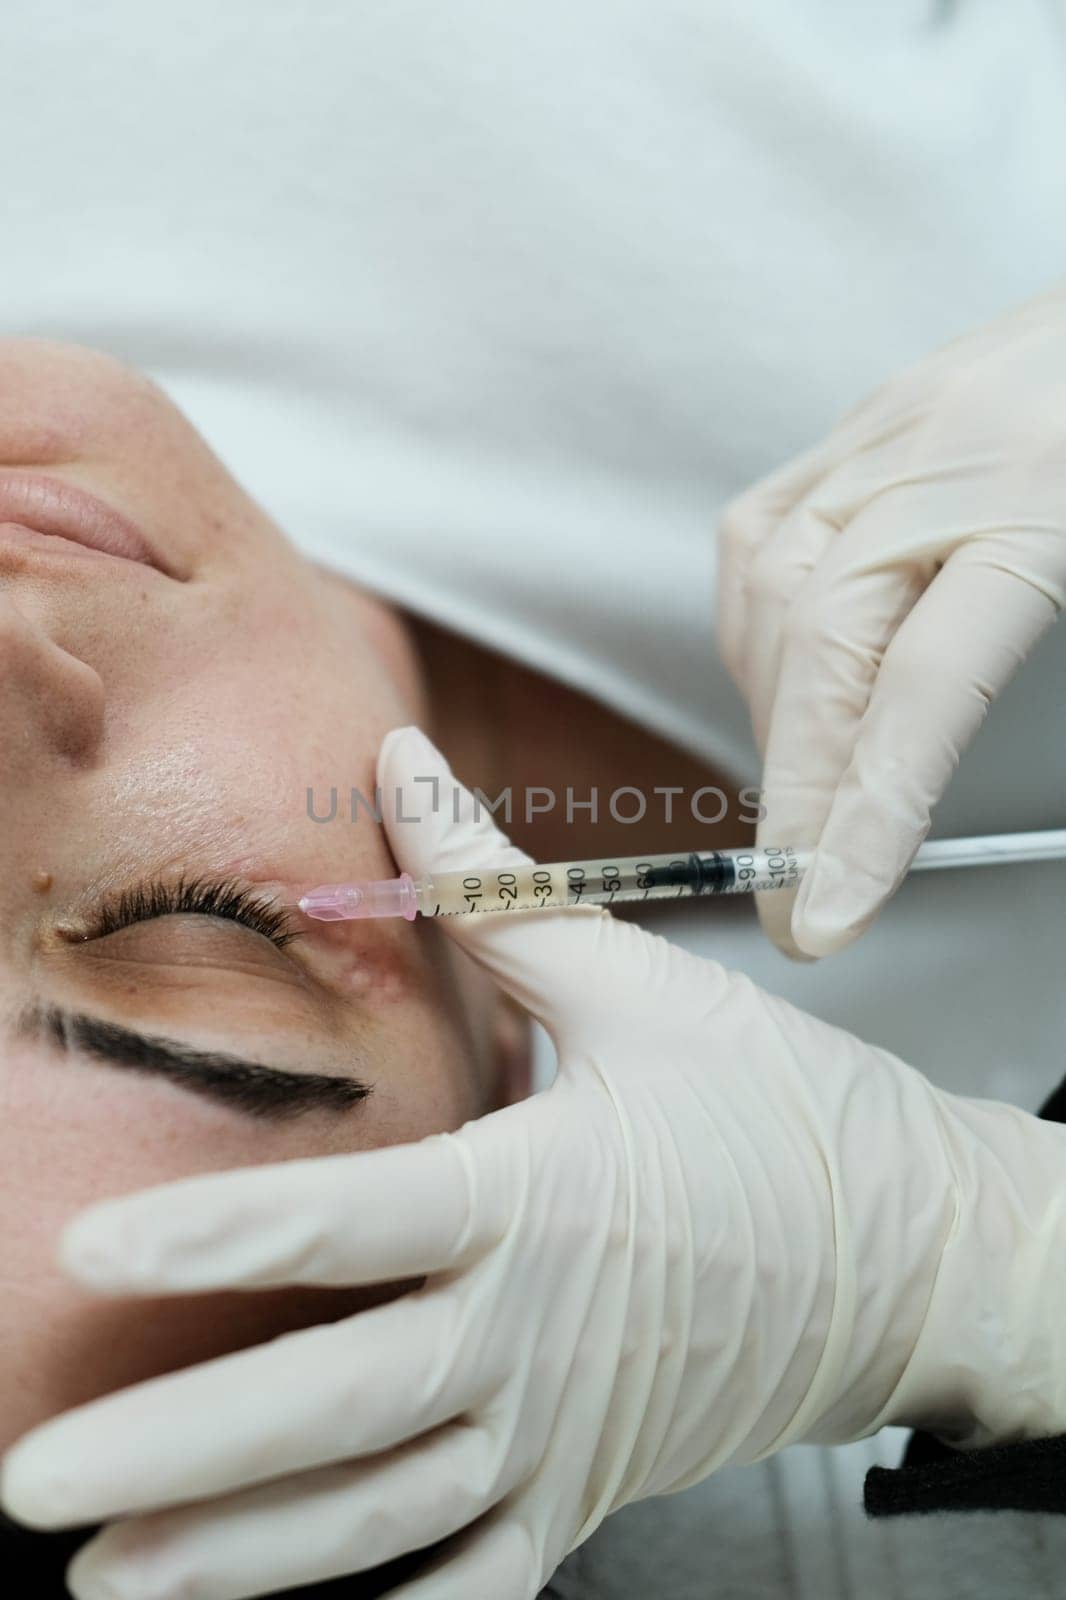 Closeup view of eye mesotherapy procedure being applied on female patient's face. Cosmetologist applying eye mesotherapy to female patient. Serum being applied in the undereye area via a syringe.